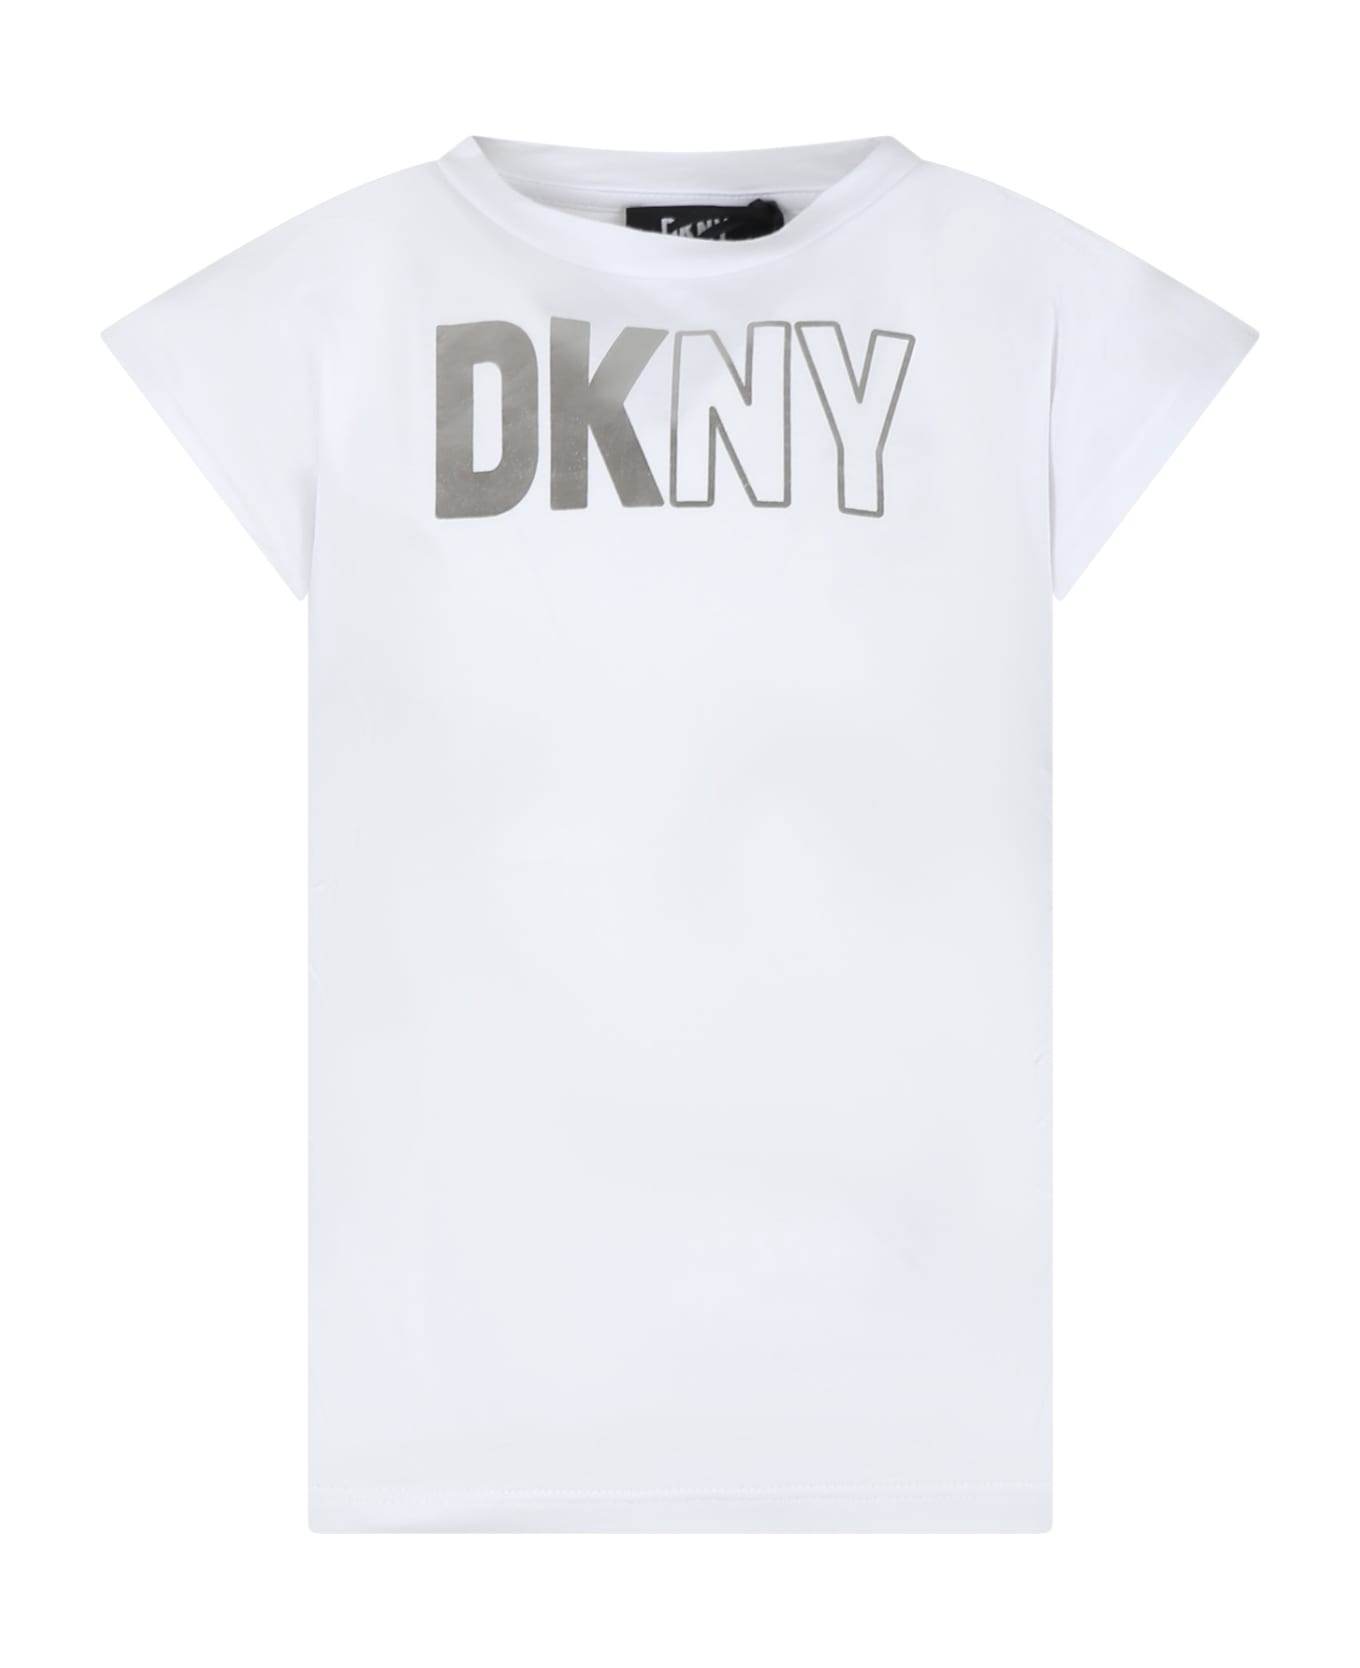 DKNY White T-shirt For Girl With Silver Logo - White